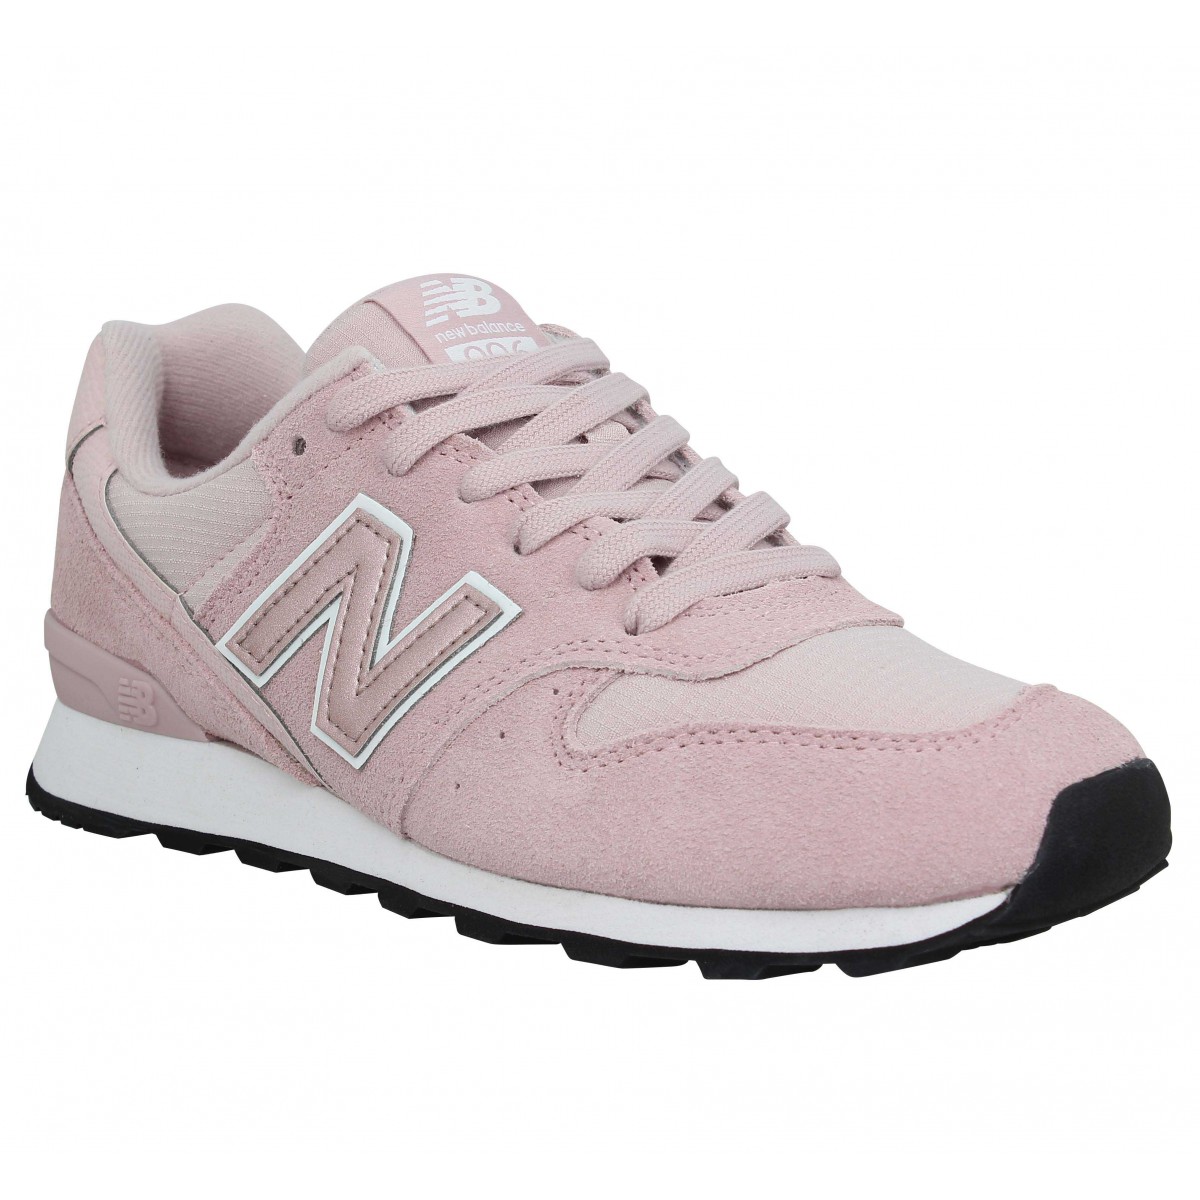 Chaussures New balance 996 velours toile femme rose femme | Fanny ...